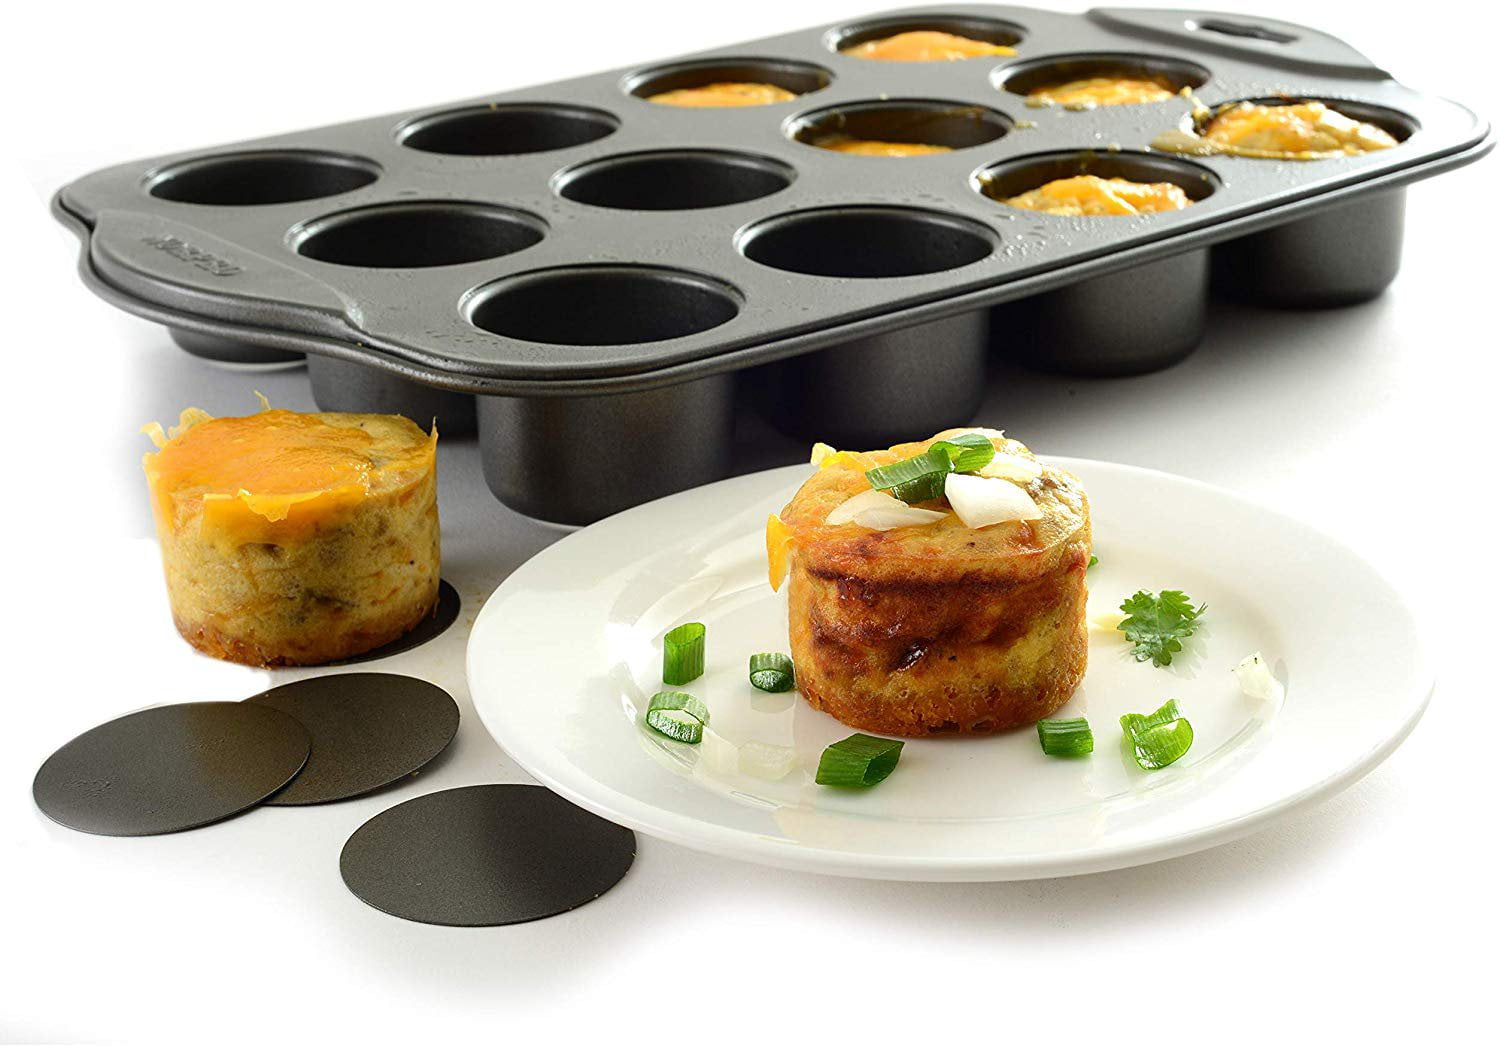 Norpro Nonstick Mini Cheesecake Pan 12 Cup - The Peppermill